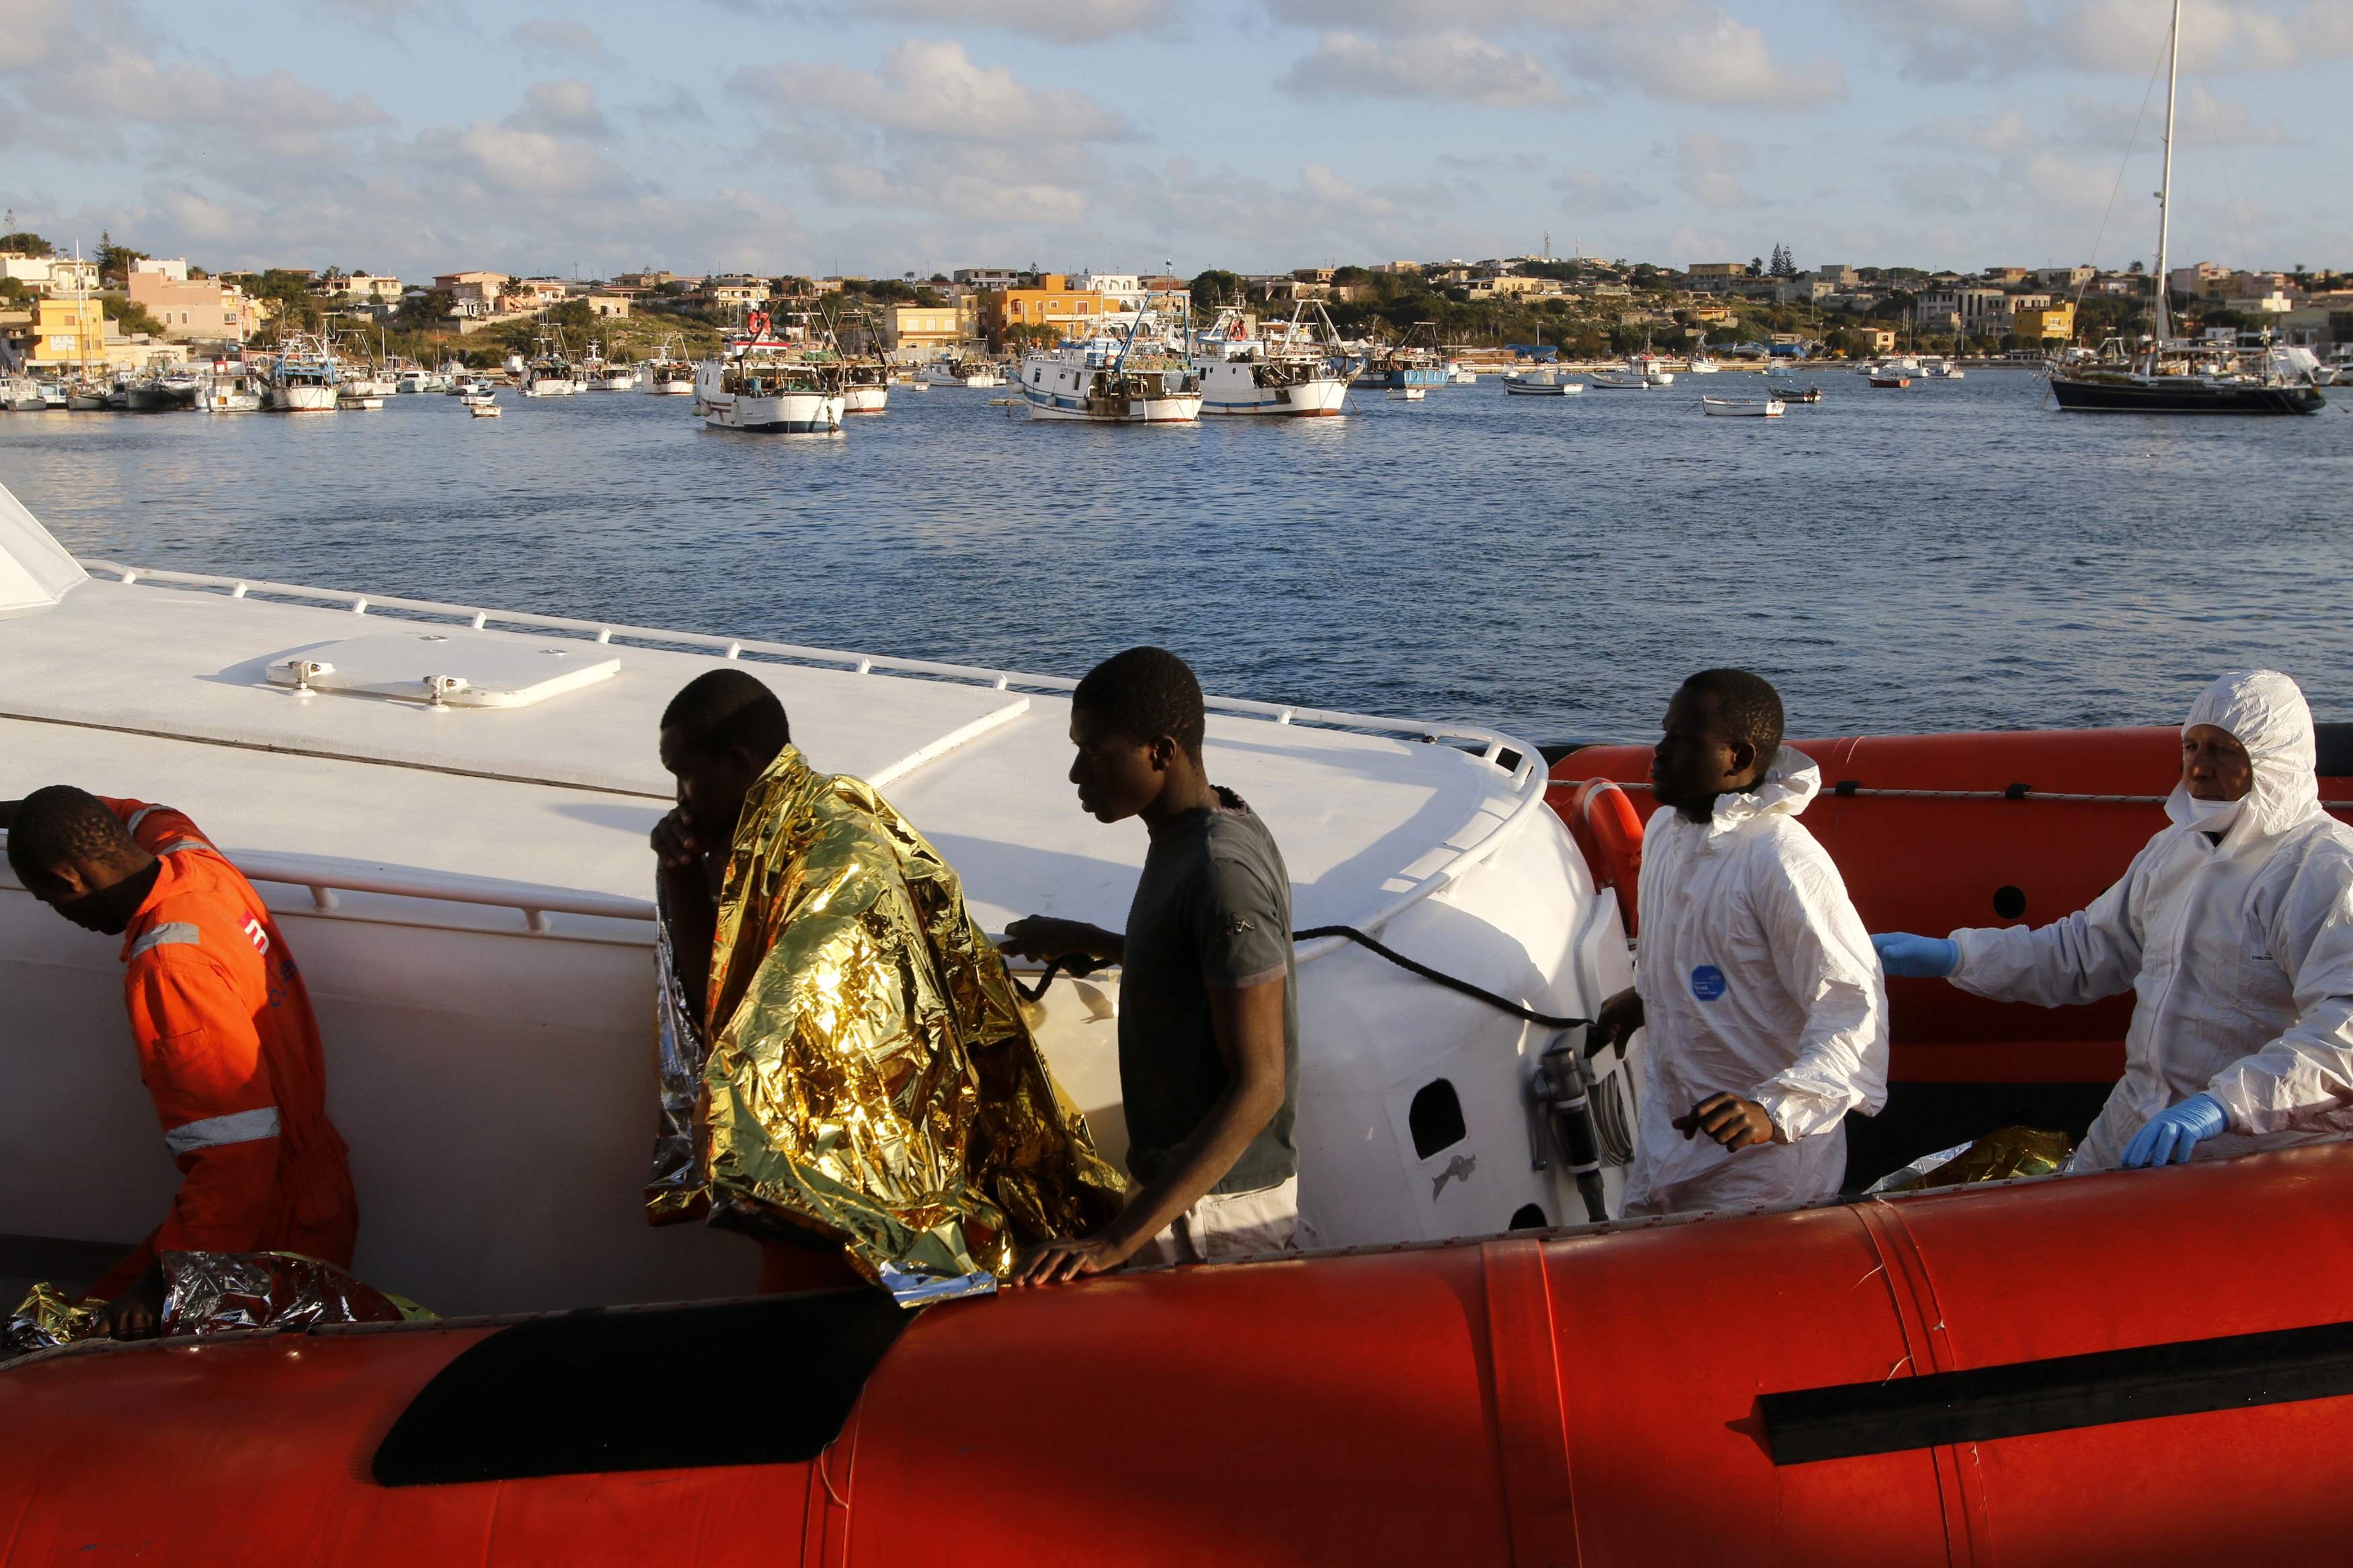 Migrants who survived a shipwreck arrive at the Lampedusa harbour